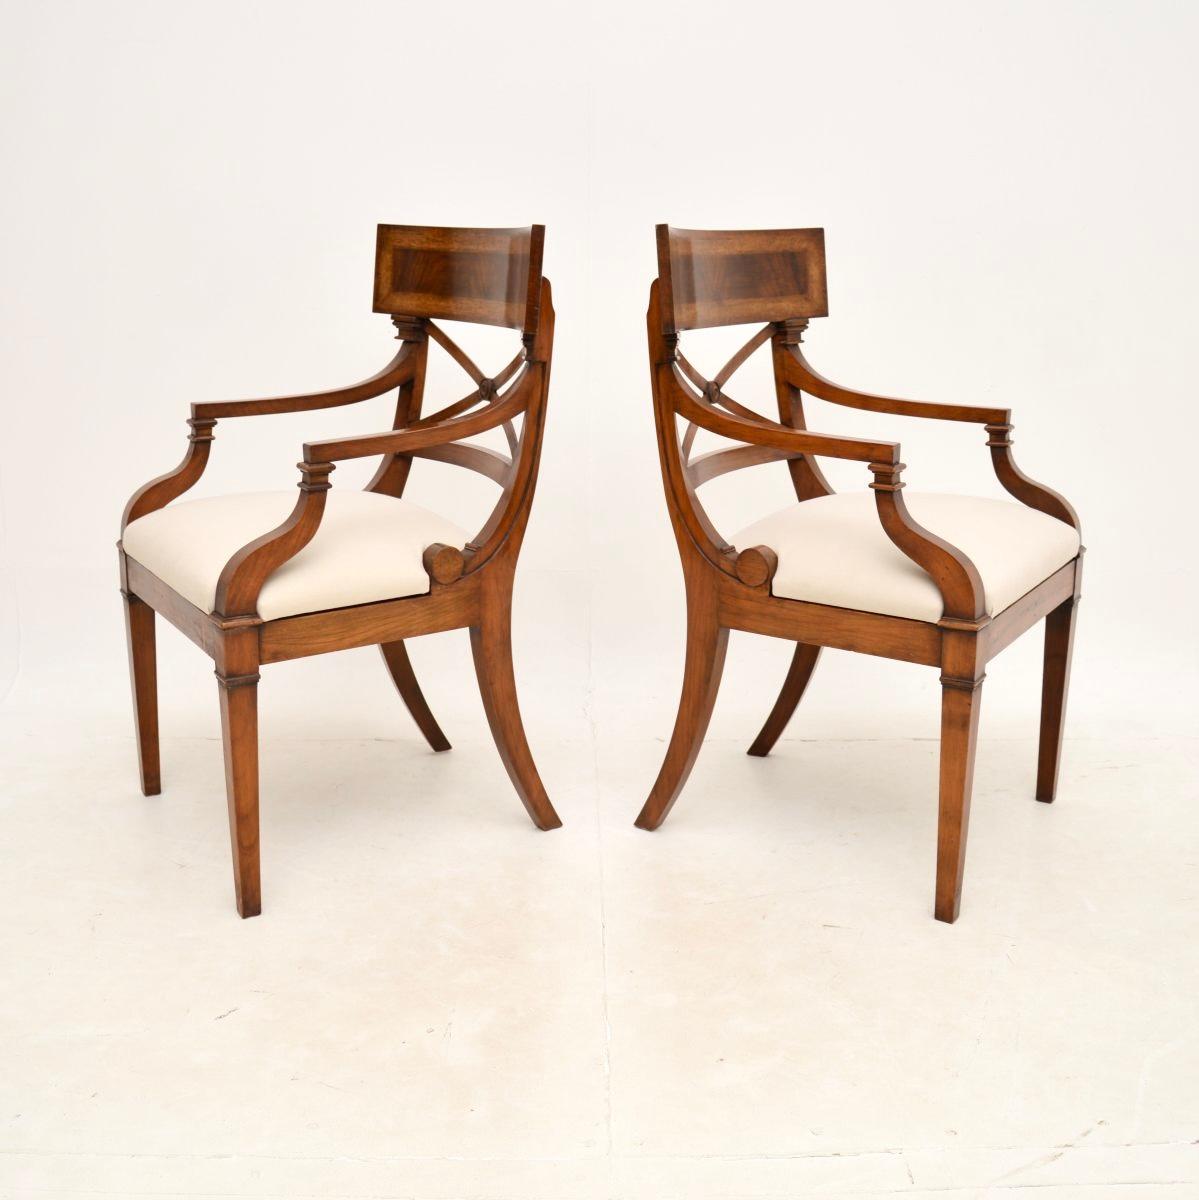 British Pair of Antique Regency Style Armchairs For Sale